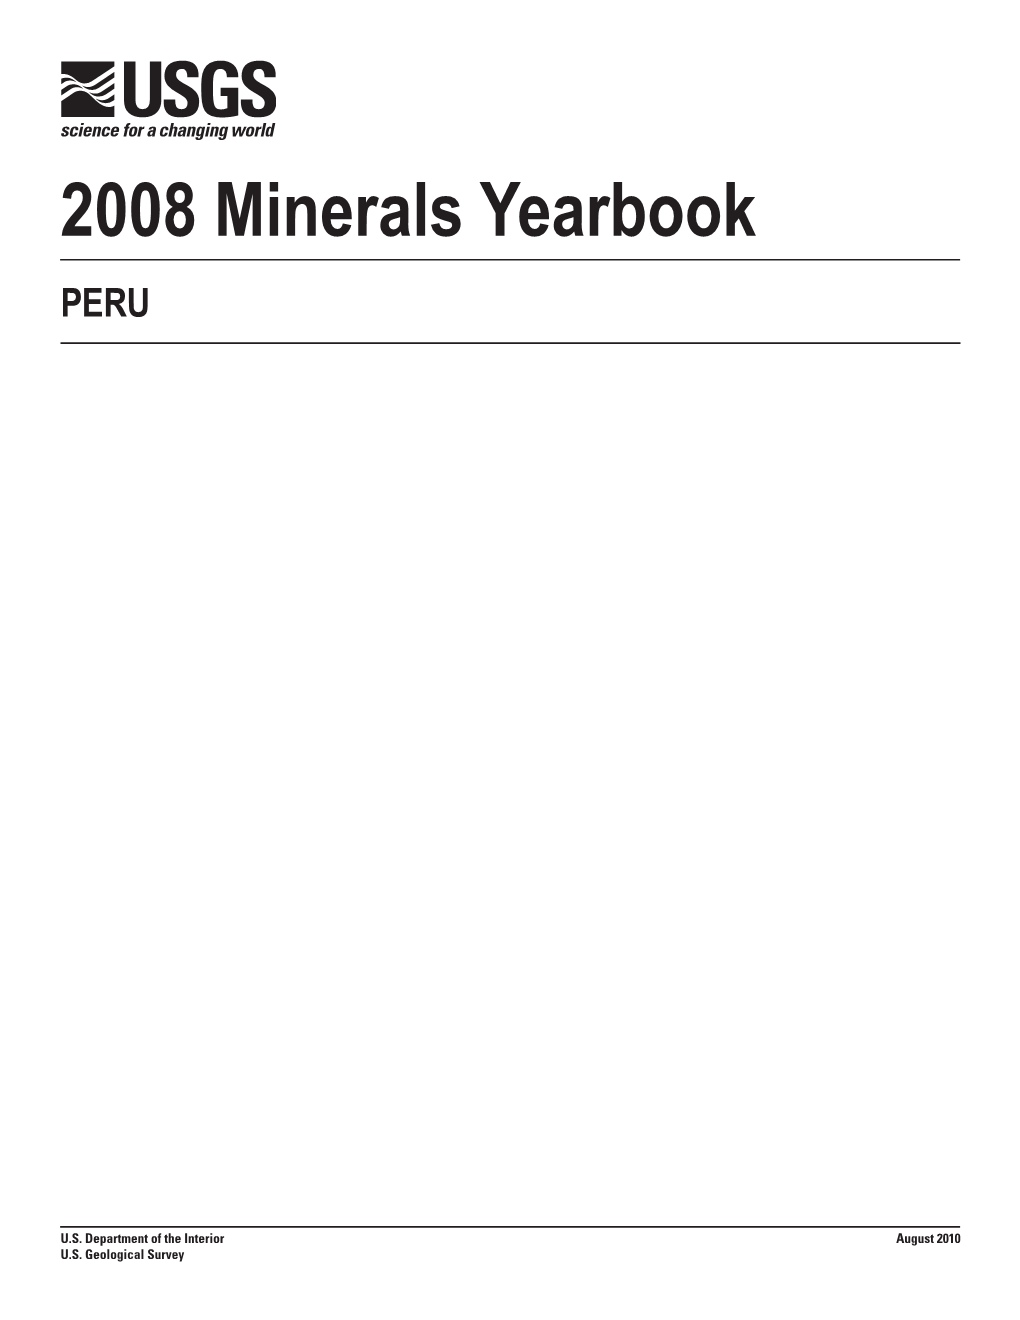 The Mineral Industry of Peru in 2008